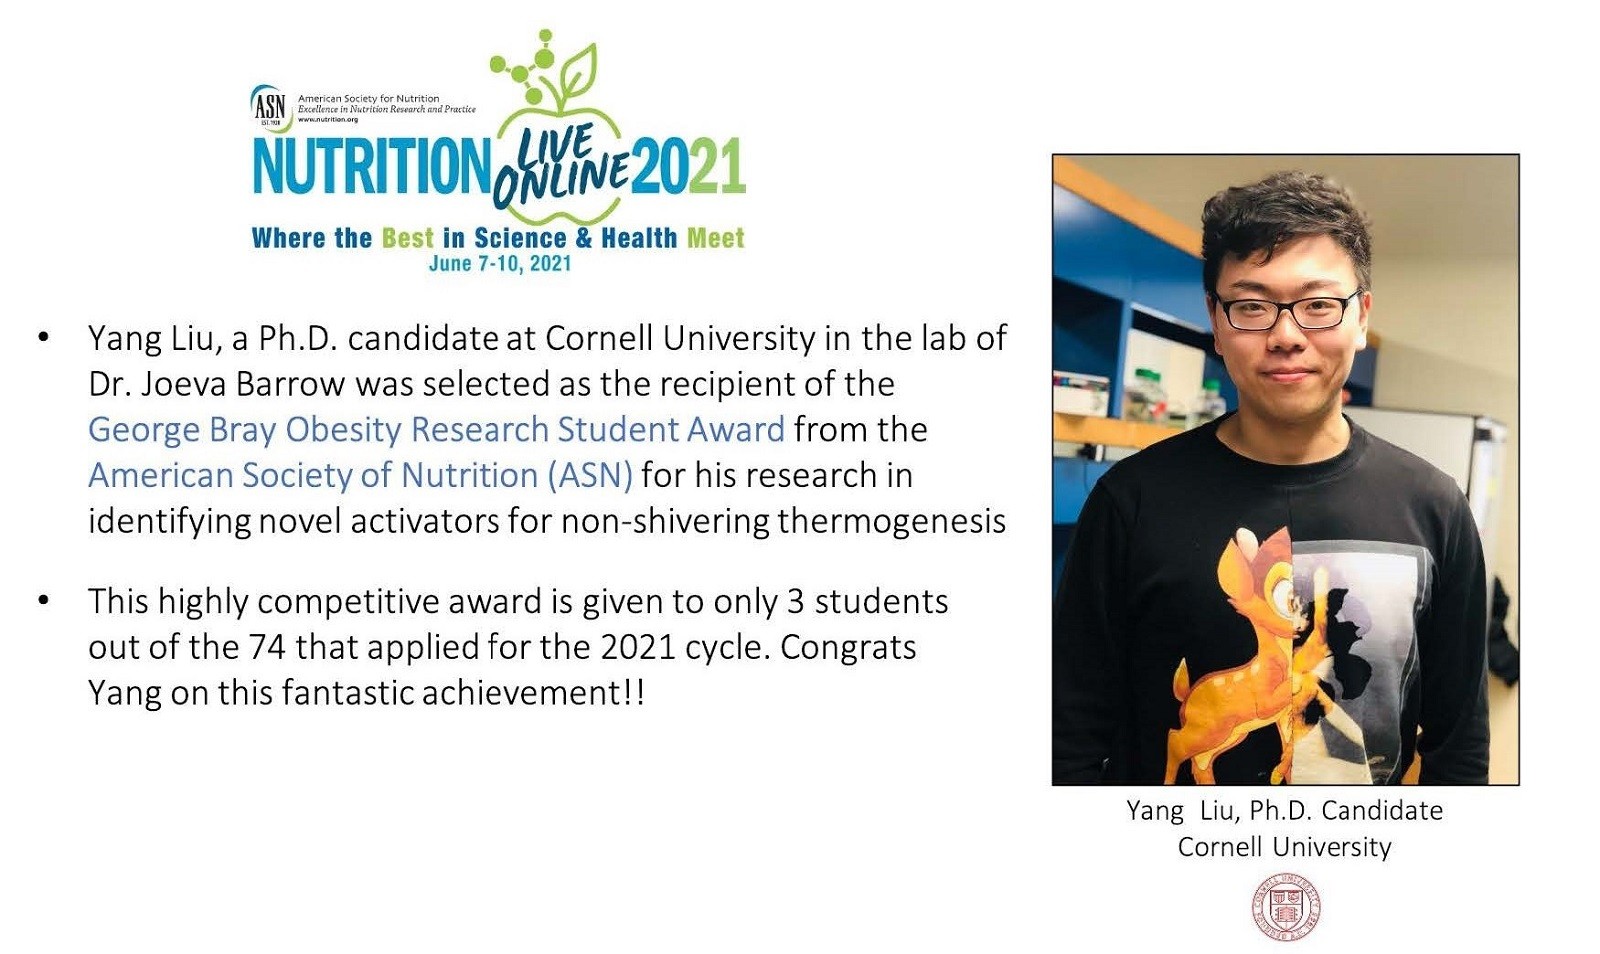 Yang Liu, a PhD candidate in DNS in the Barrow Lab won the George Bray Obesity Research Student Award from ASN for his research in identifying novel activators for non-shivering thermogenesis. This highly competitive award is only given to 3 students out of the 74 who applied.